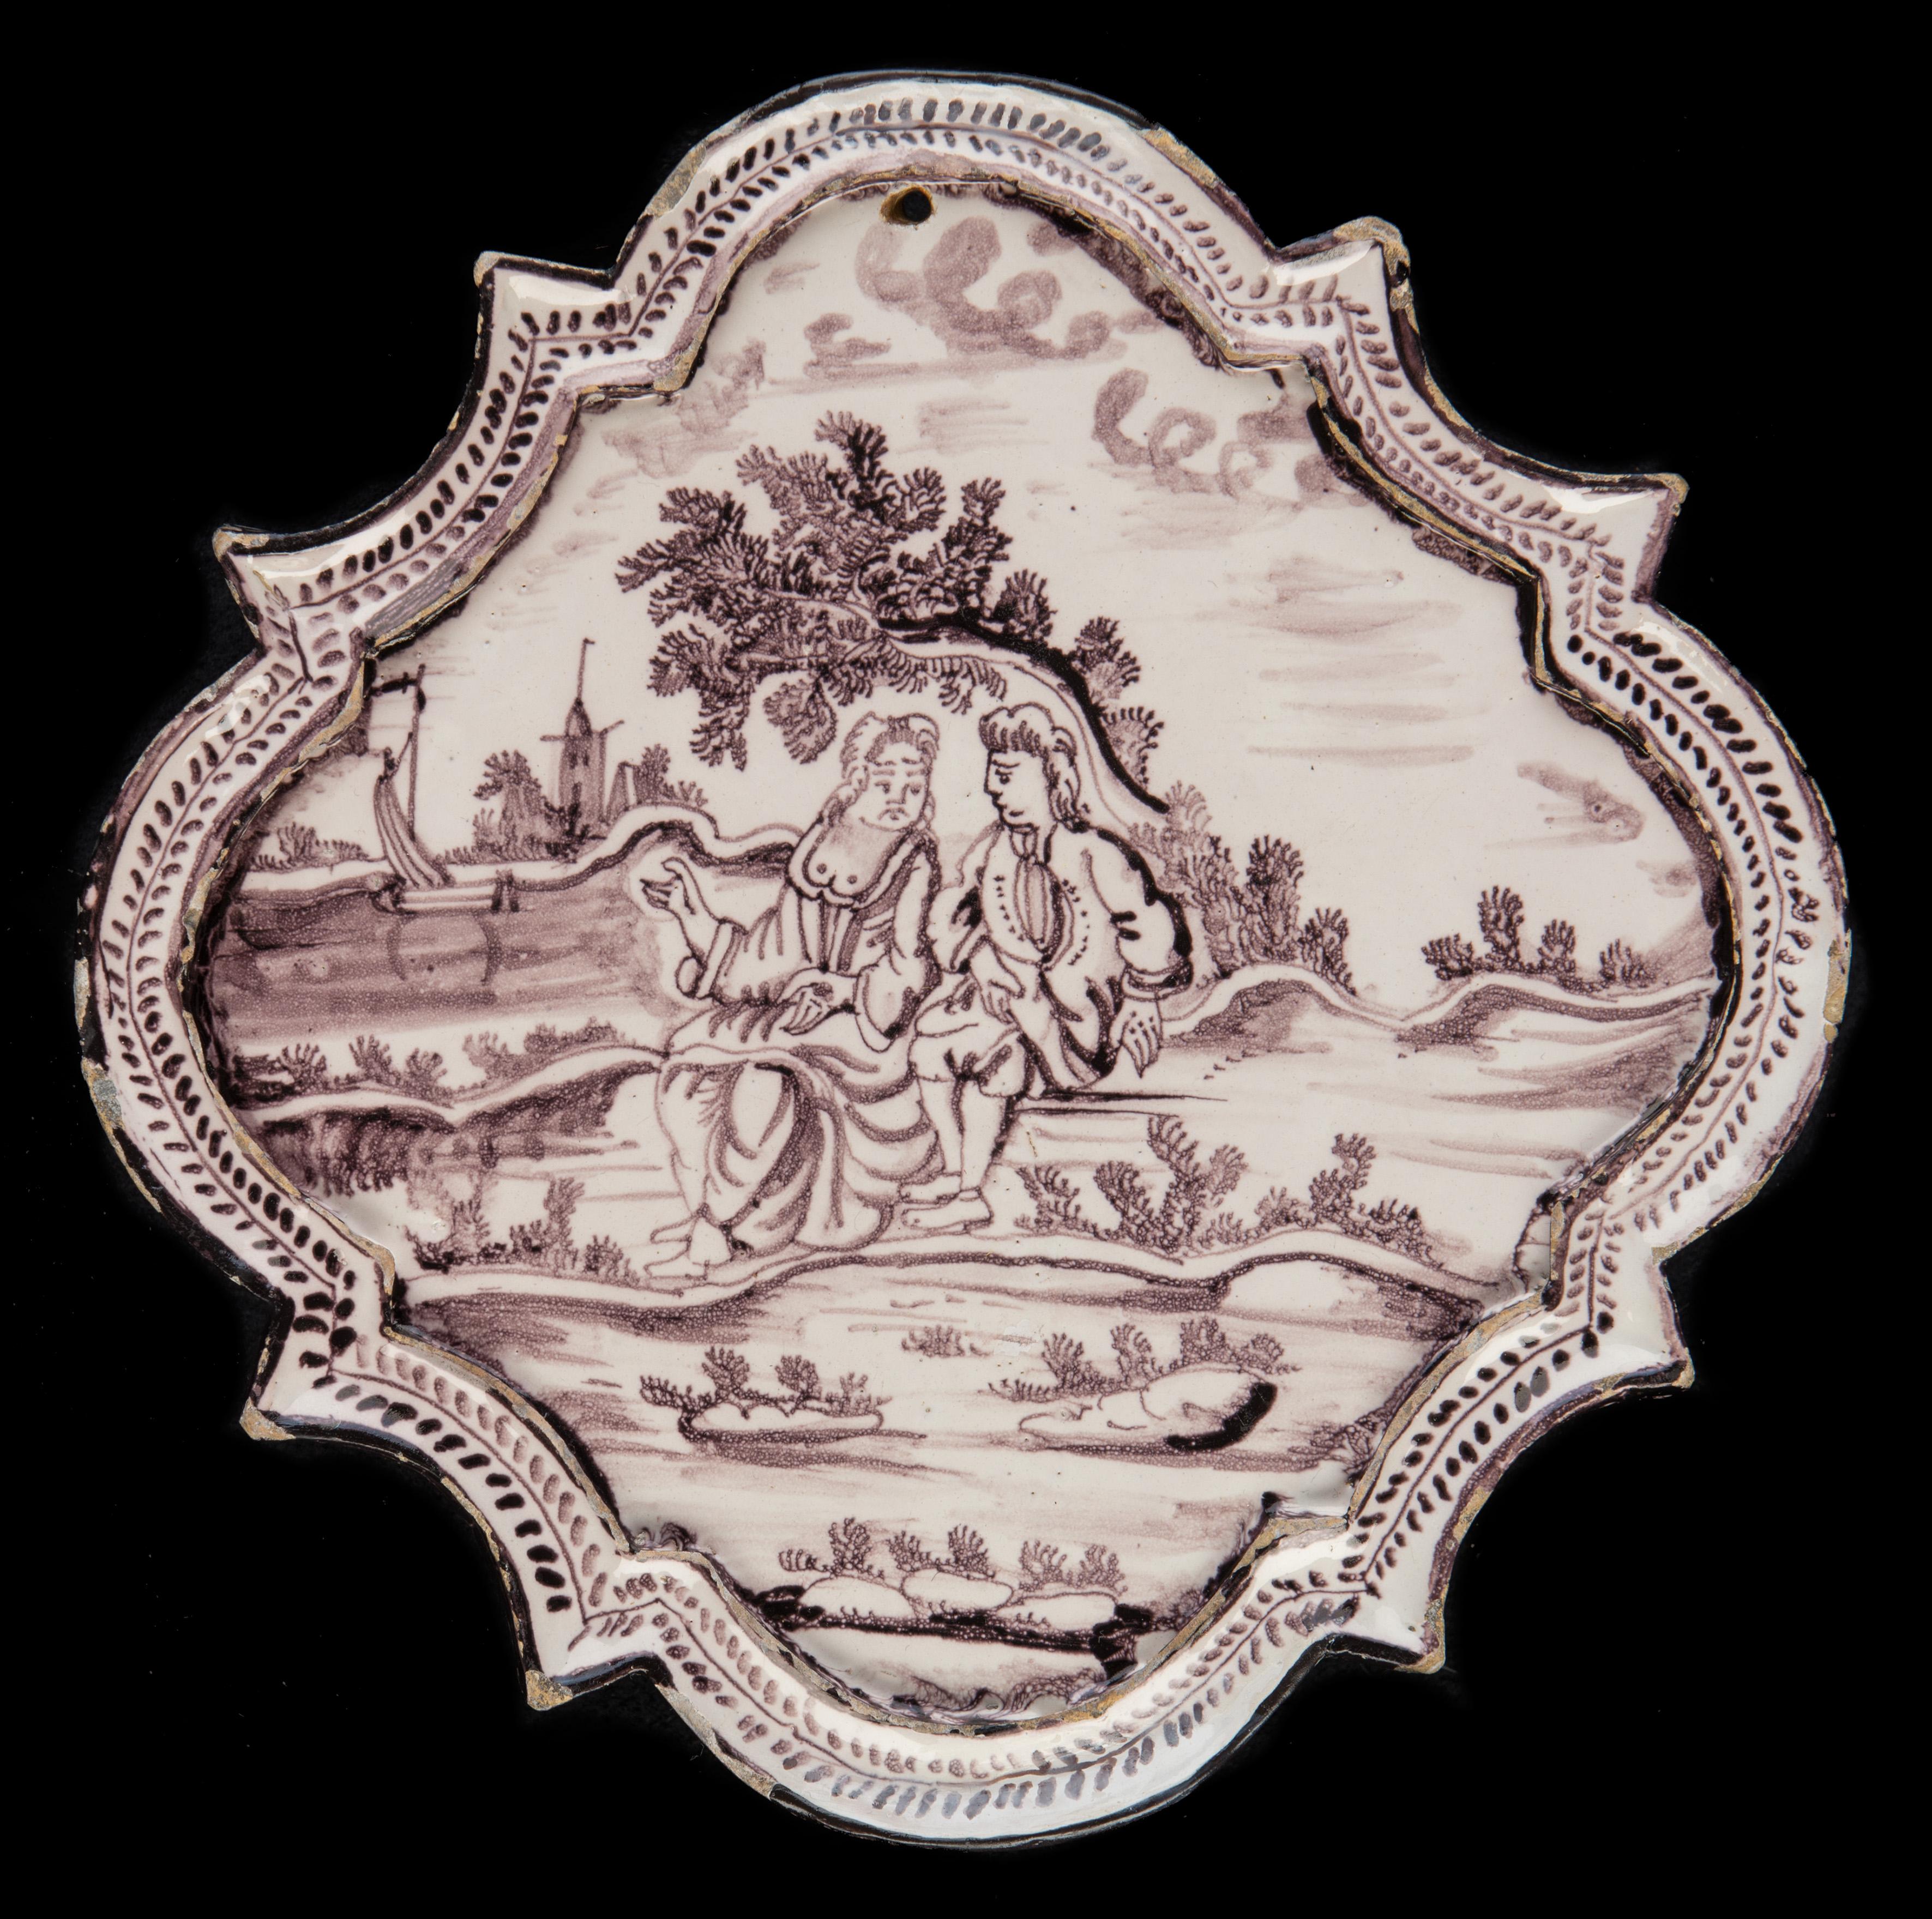 Purple and white plaque with figures in a landscape. Utrecht, circa 1760. Mark: Le J

Lozenge-shaped purple and white plaque with a conversing couple in a landscape. In the foreground a man and a women with a bare bosom sit on a river bank, behind